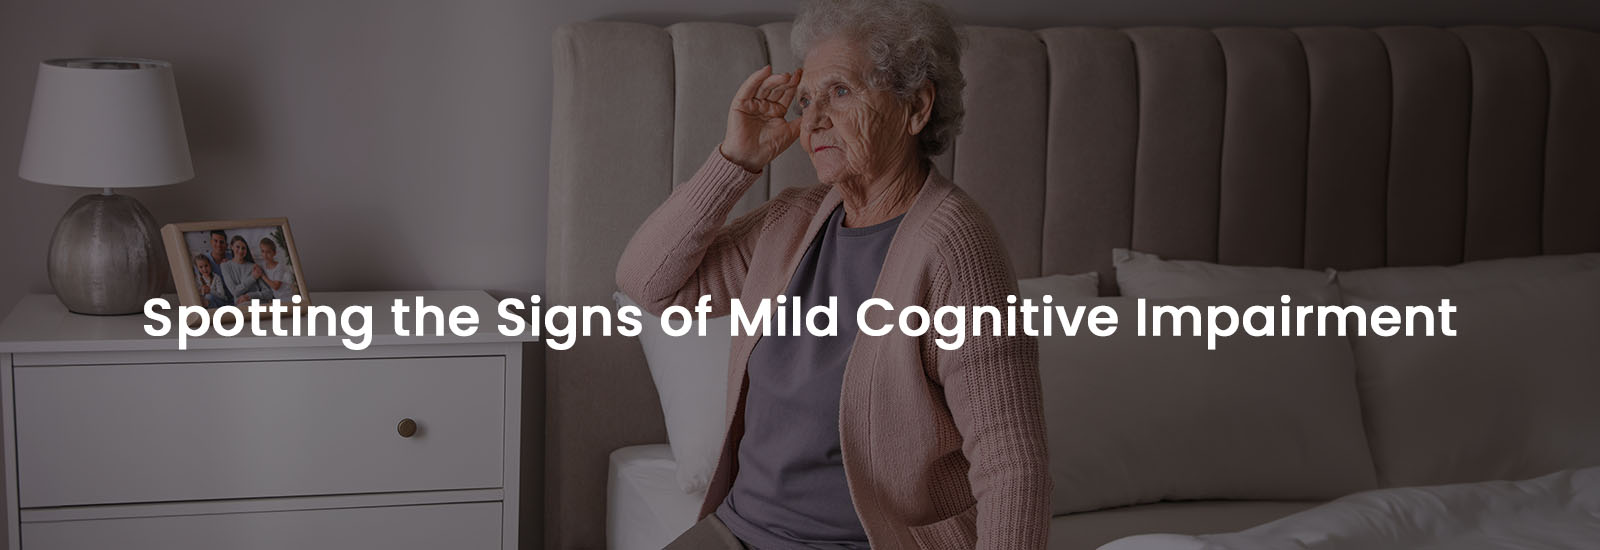 Spotting the Signs of Mild Cognitive Impairment | Banner Image